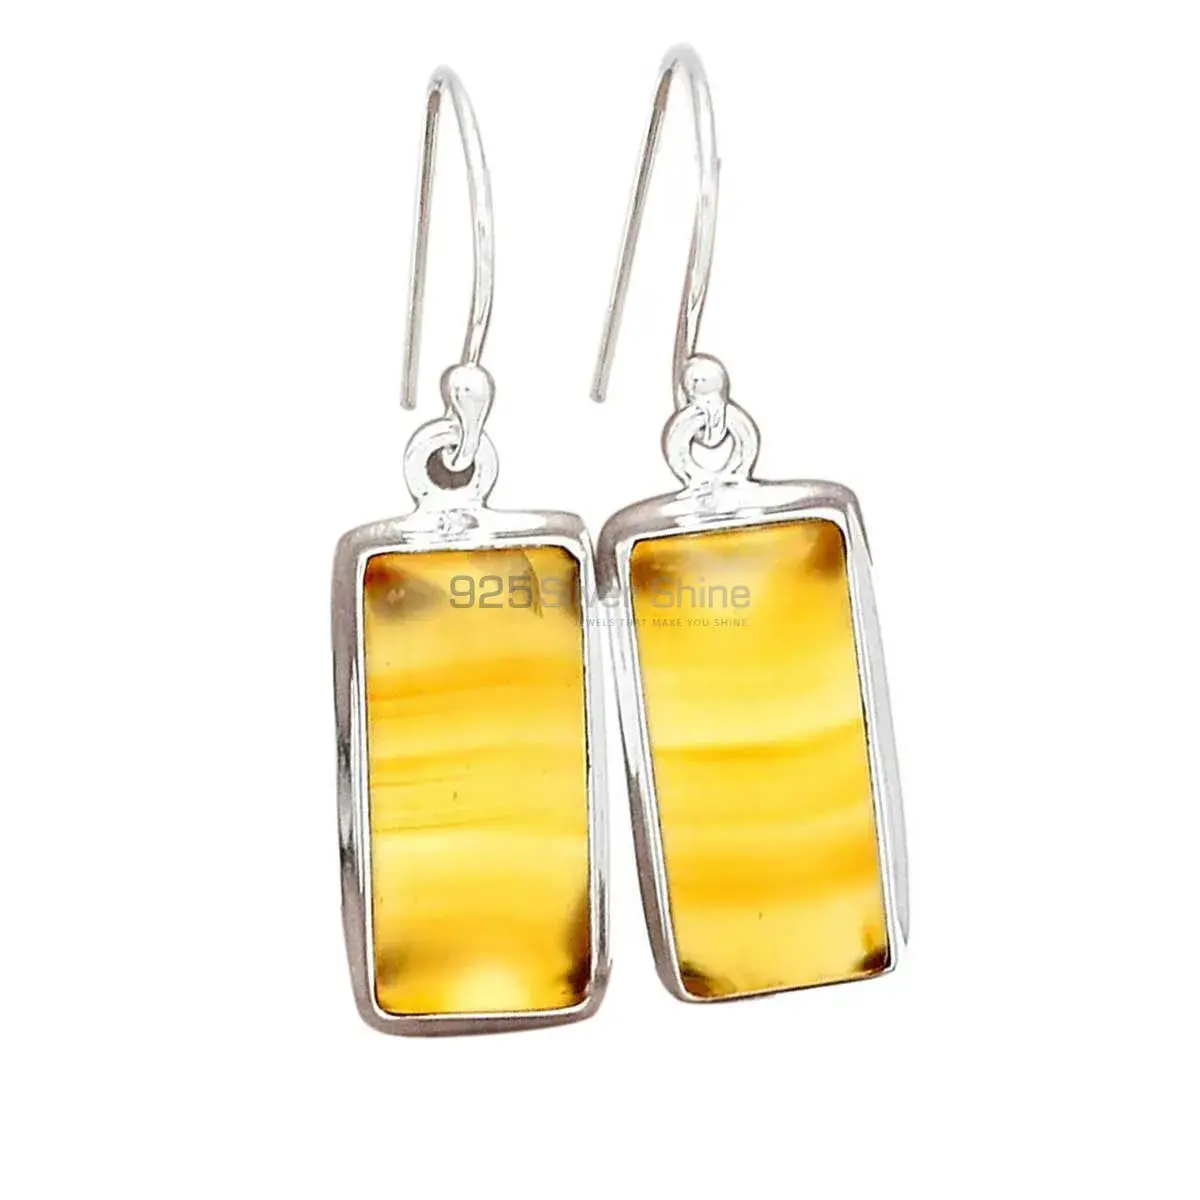 Inexpensive 925 Sterling Silver Handmade Earrings Manufacturer In Montana Agate Gemstone Jewelry 925SE2312_0